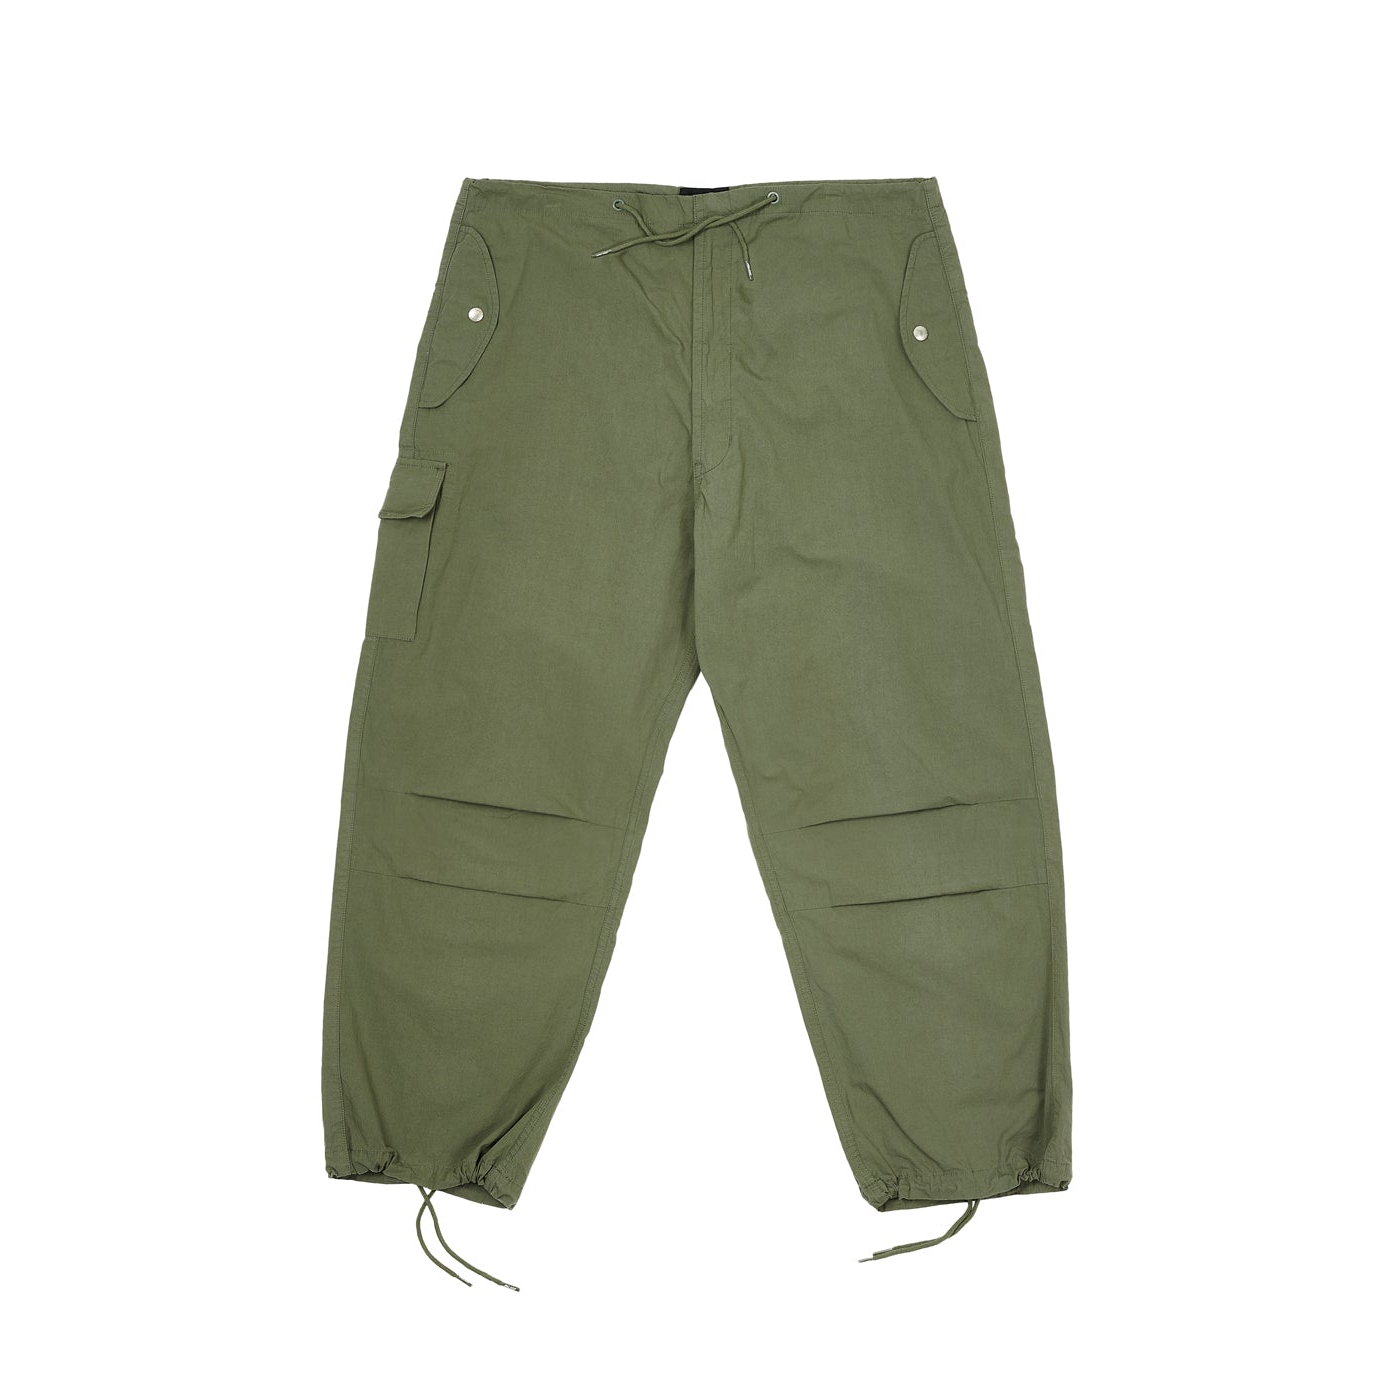 Thumbnail PALACE OVER TROUSERS THE DEEP GREEN one color